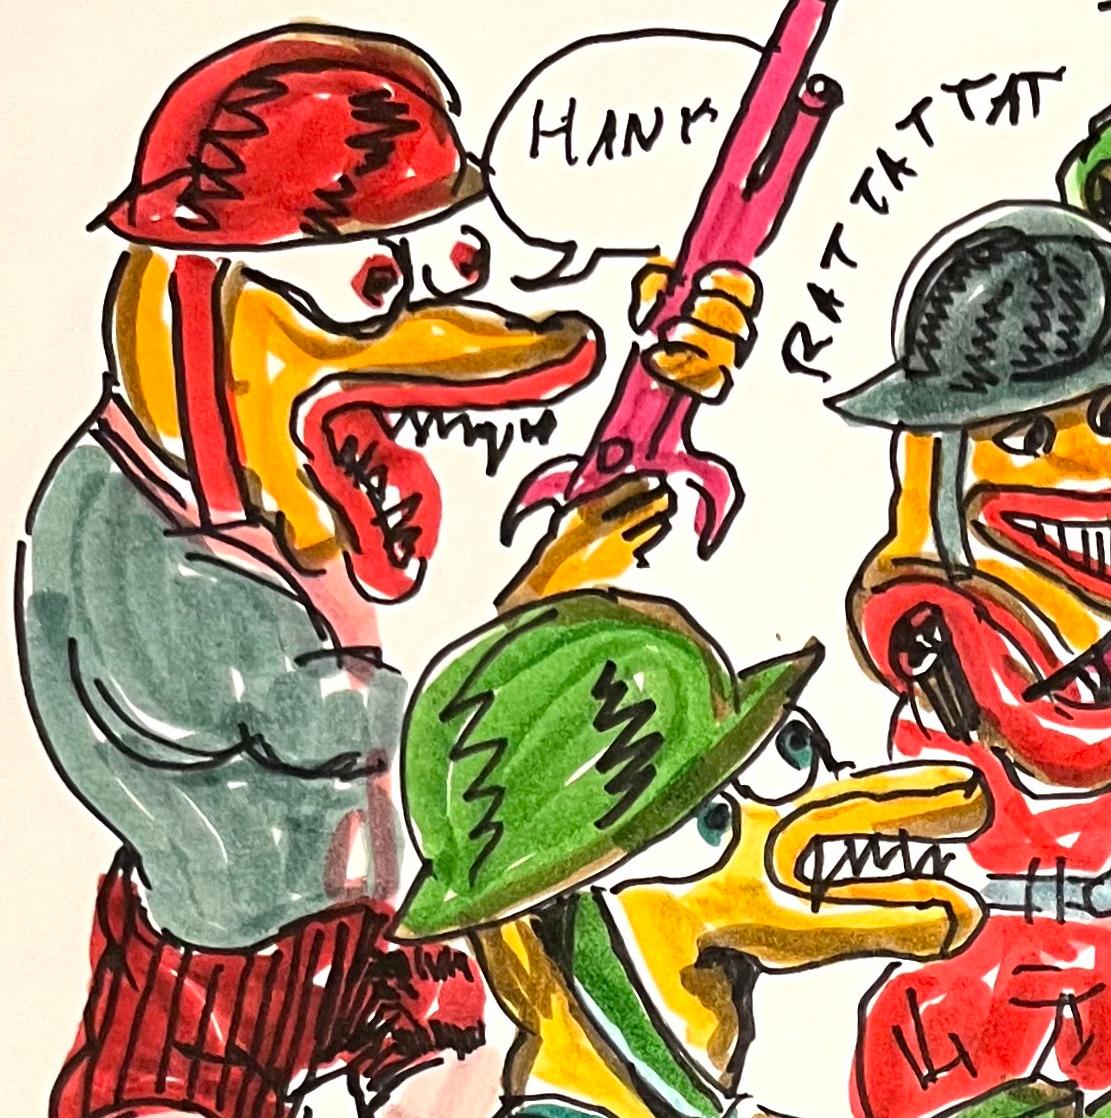 Hank - Daniel Johnston, Colorful Figurative Ink Drawing, Duck Wars Series For Sale 4